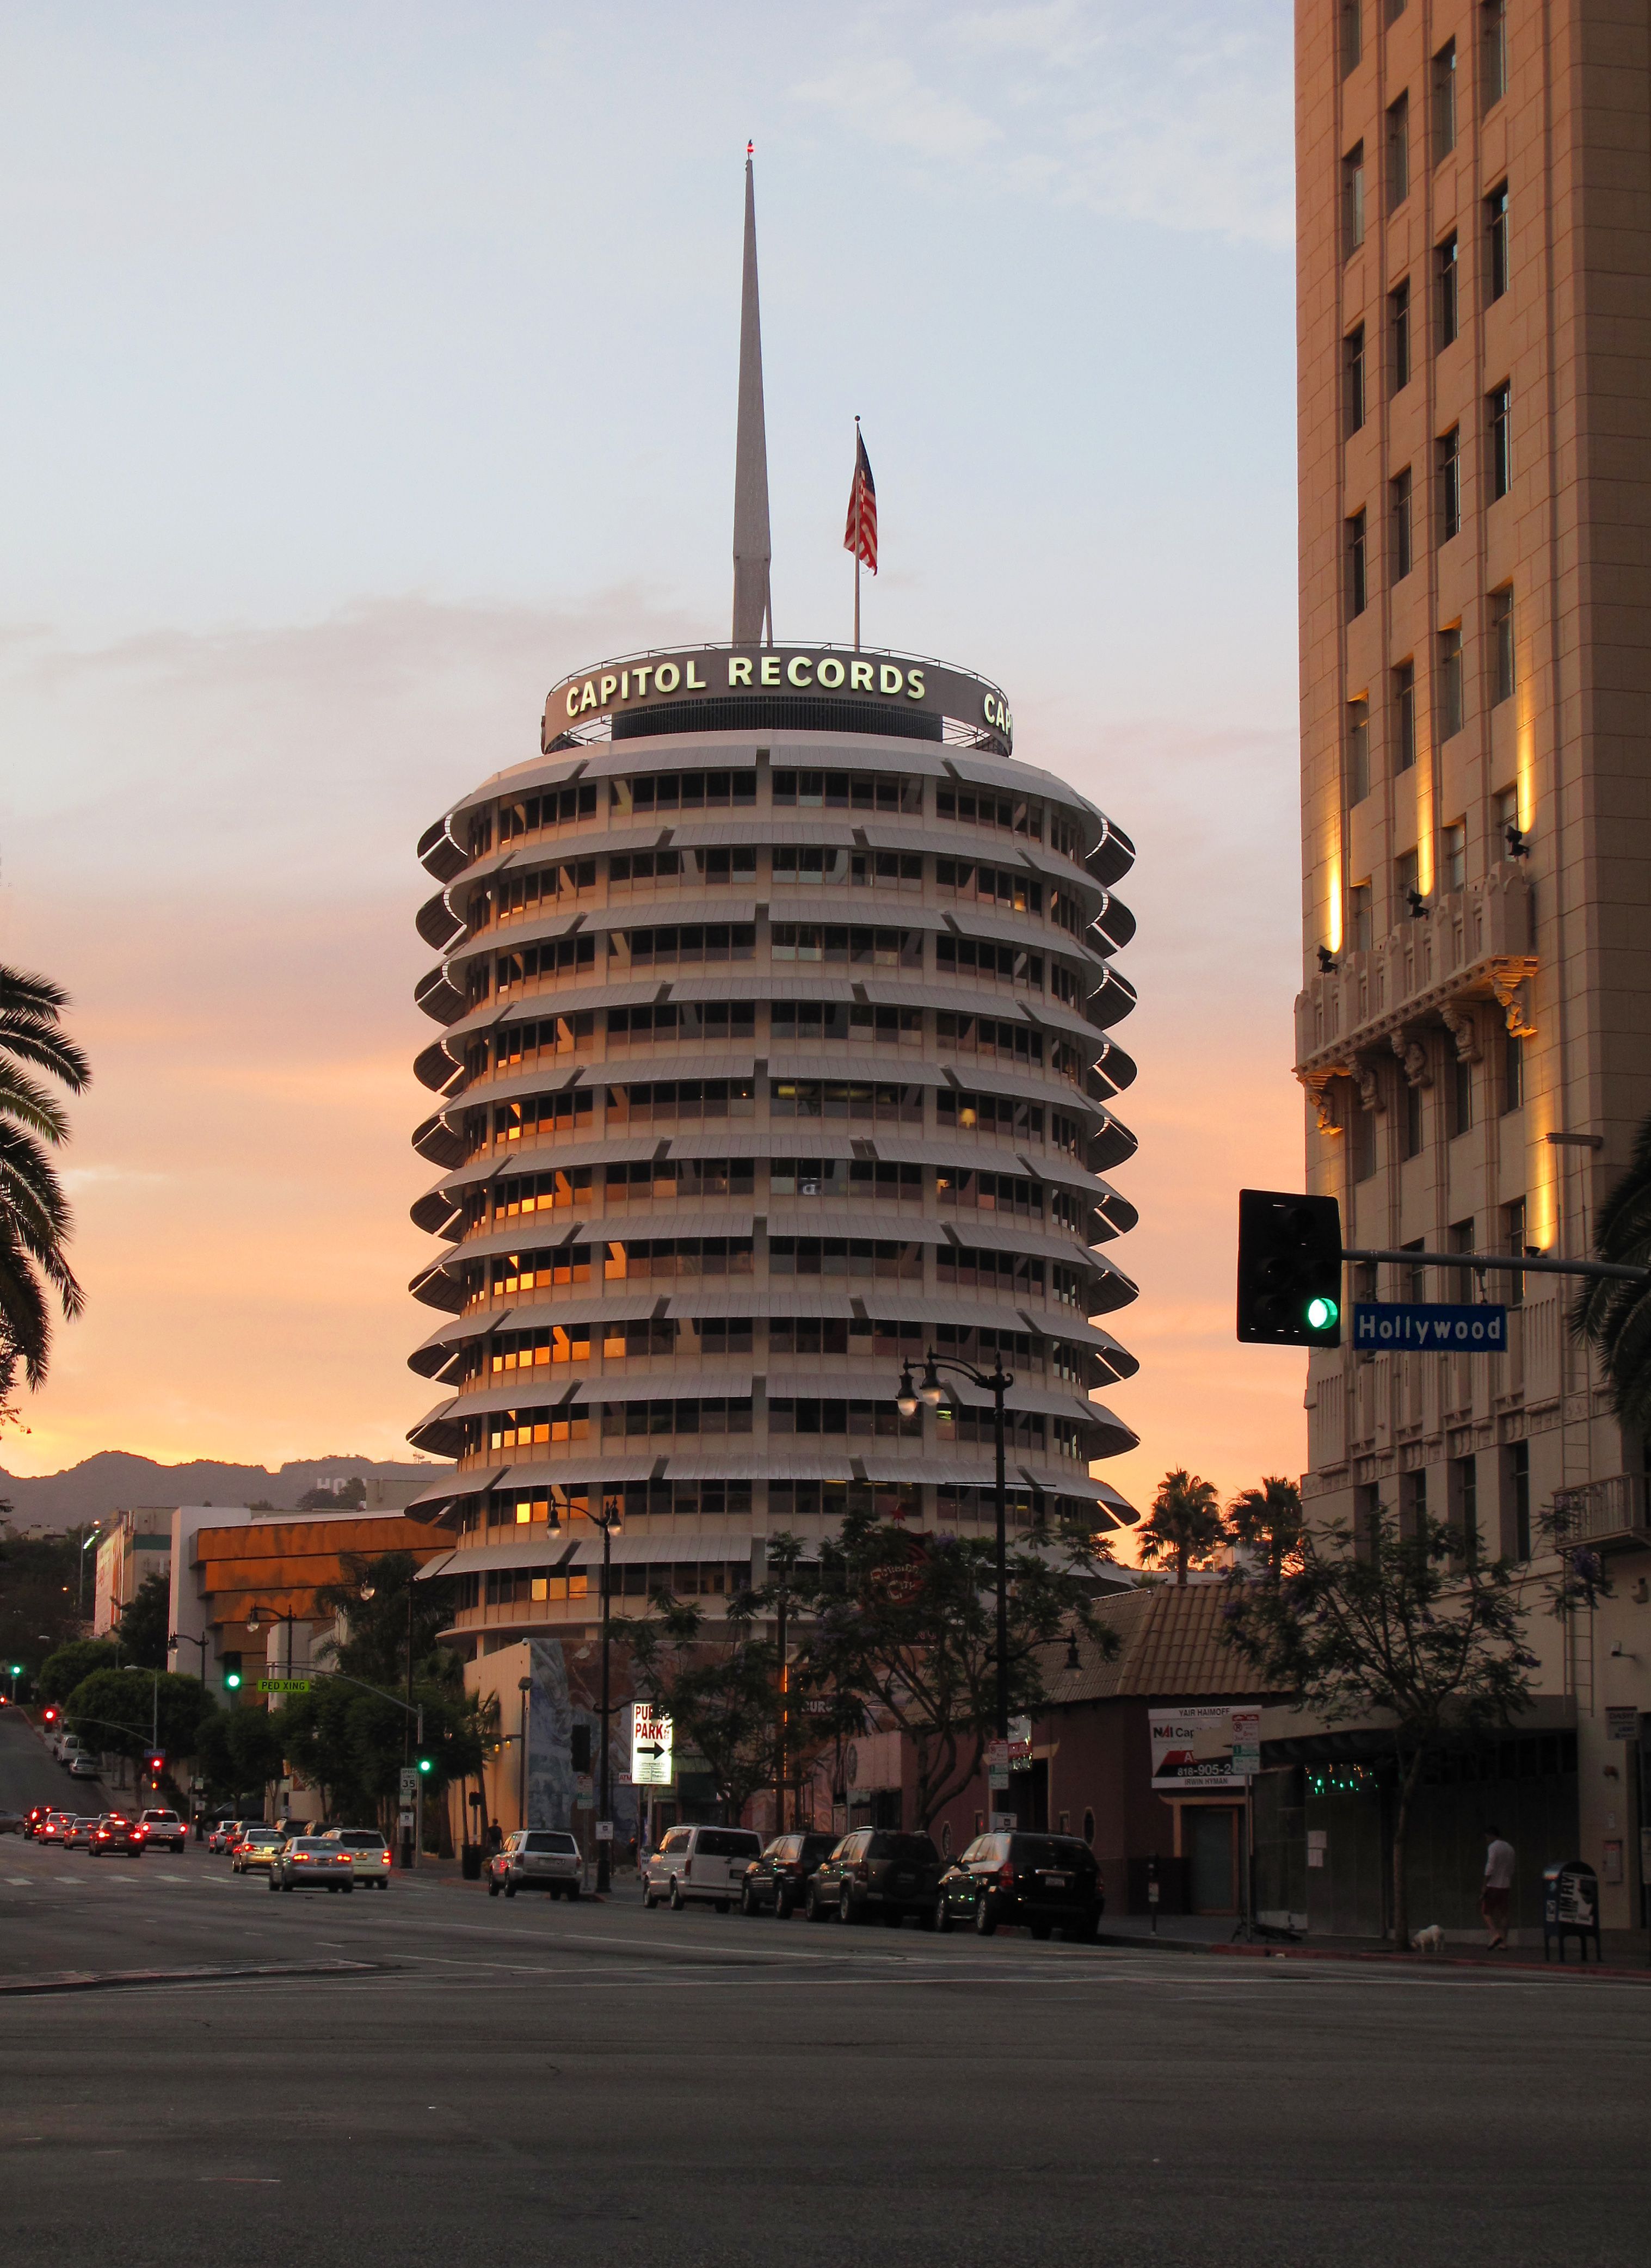 Capitol Records building in